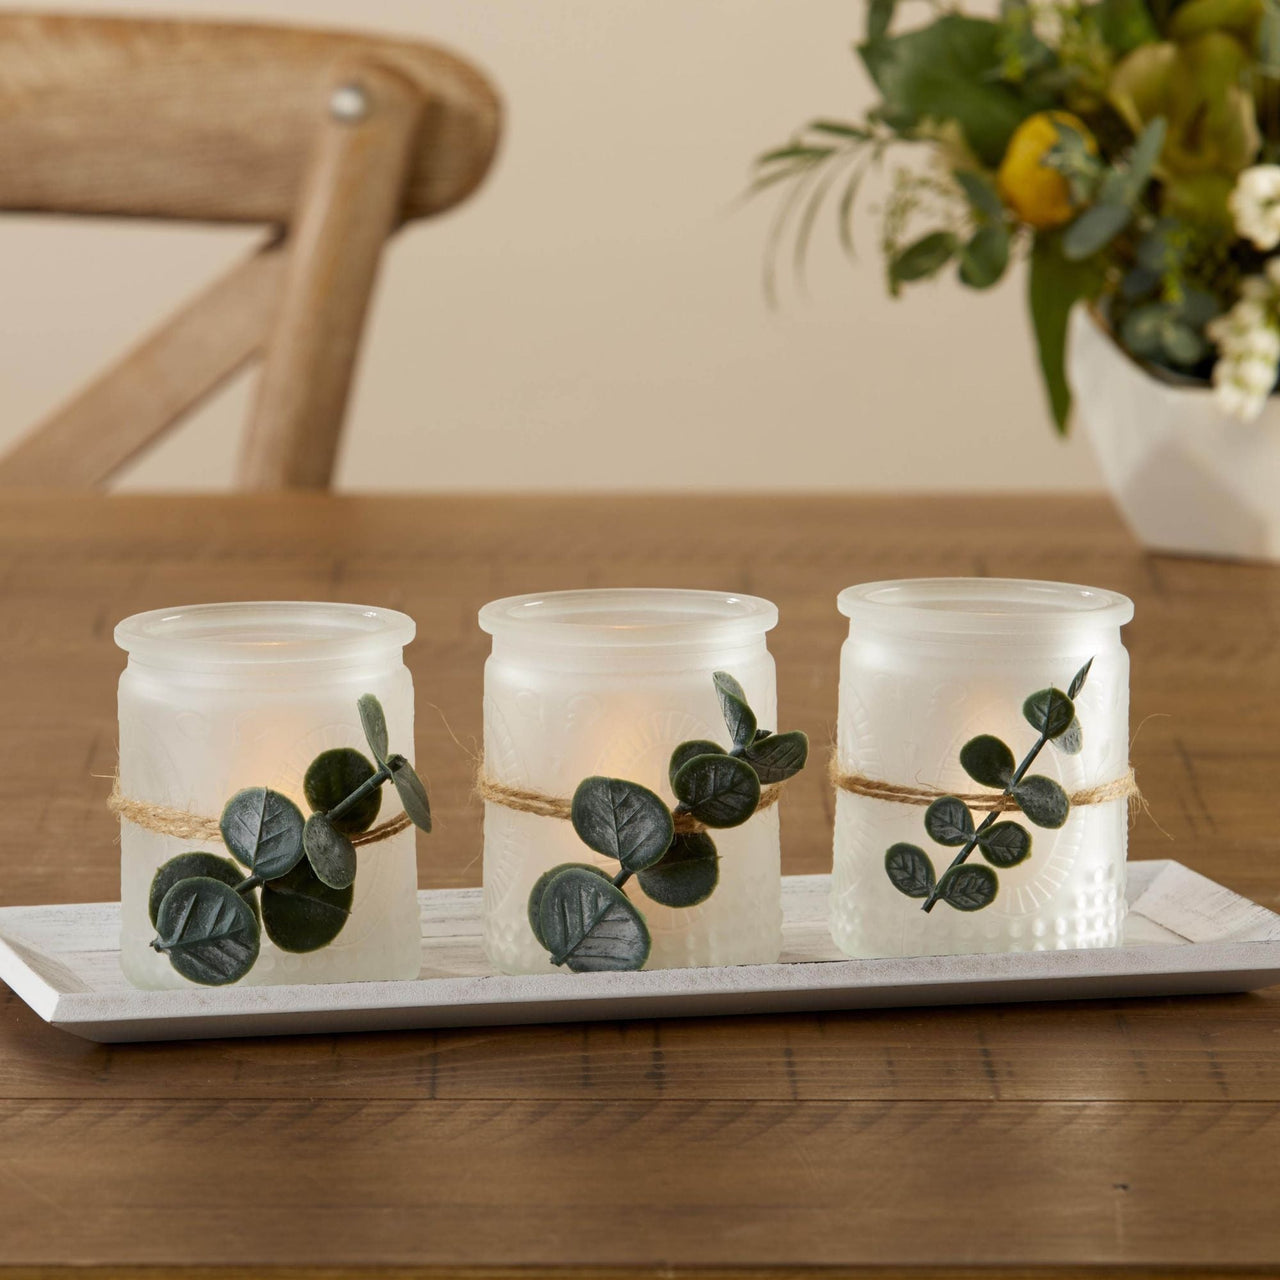 4 Piece Frosted Votive & Tray Set - Main Image | My Wedding Favors